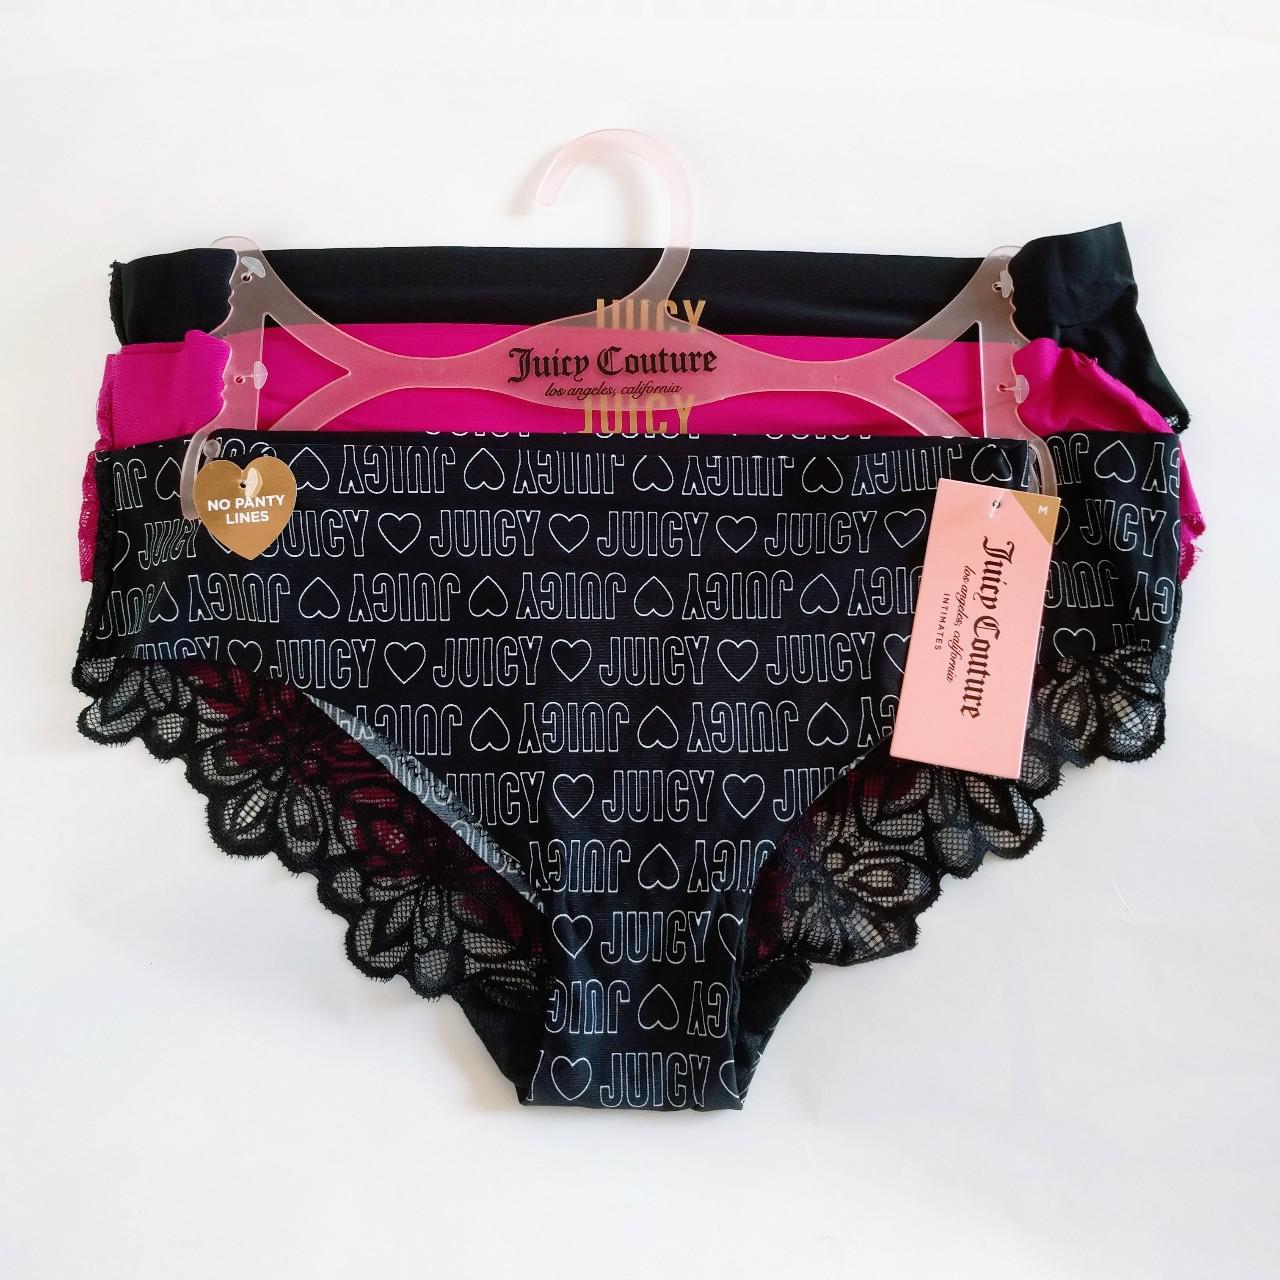 New with tags. Juicy Couture Intimate Lace, No Panty